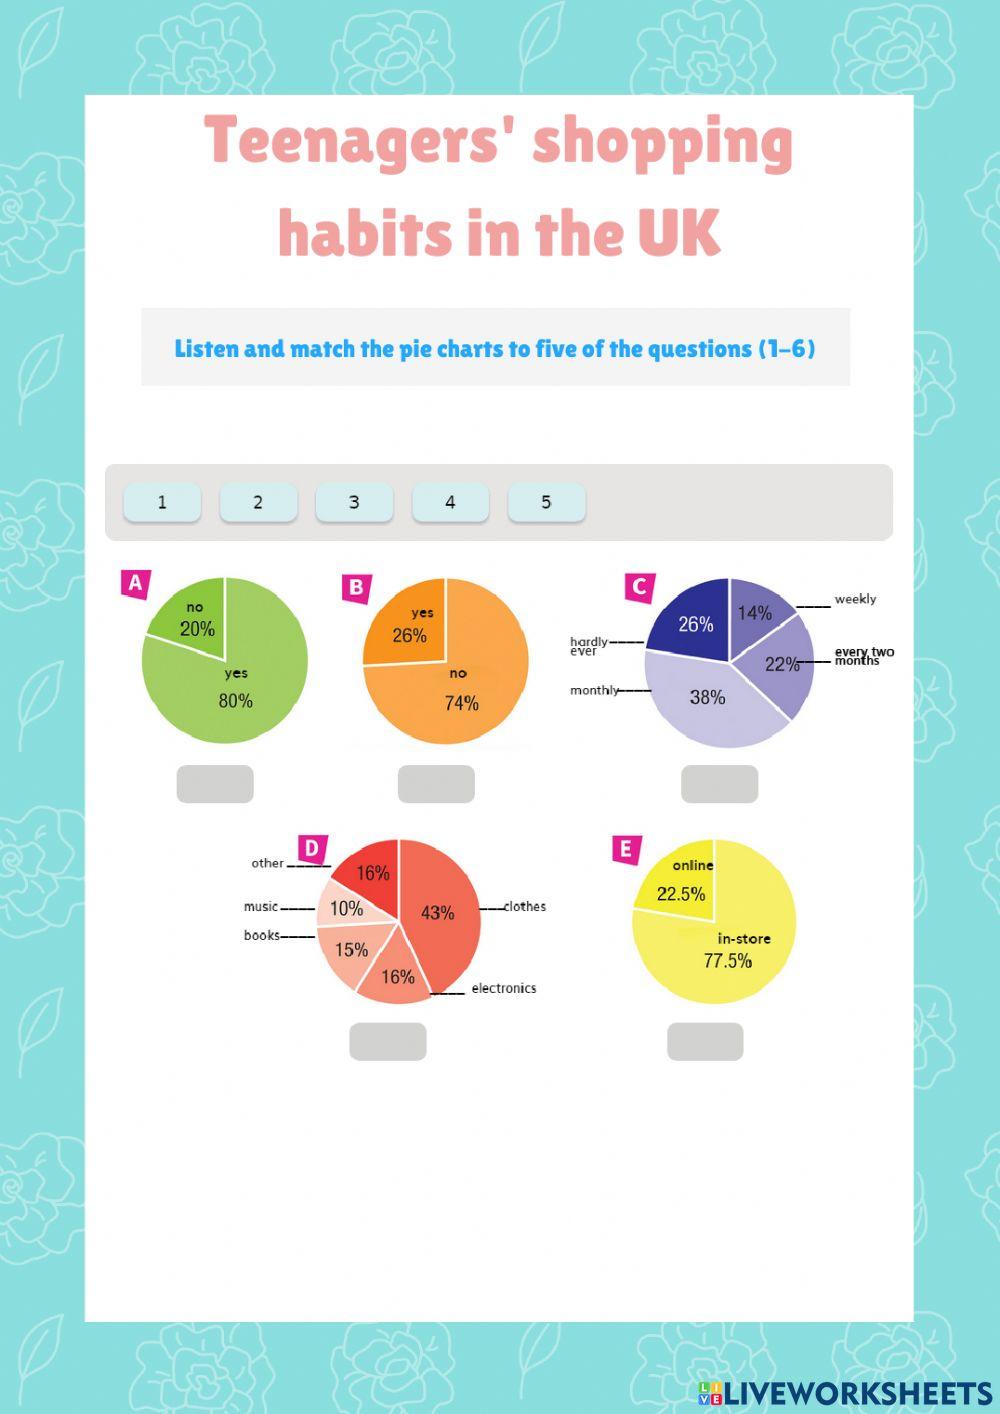 Teenagers's shopping habits in the UK